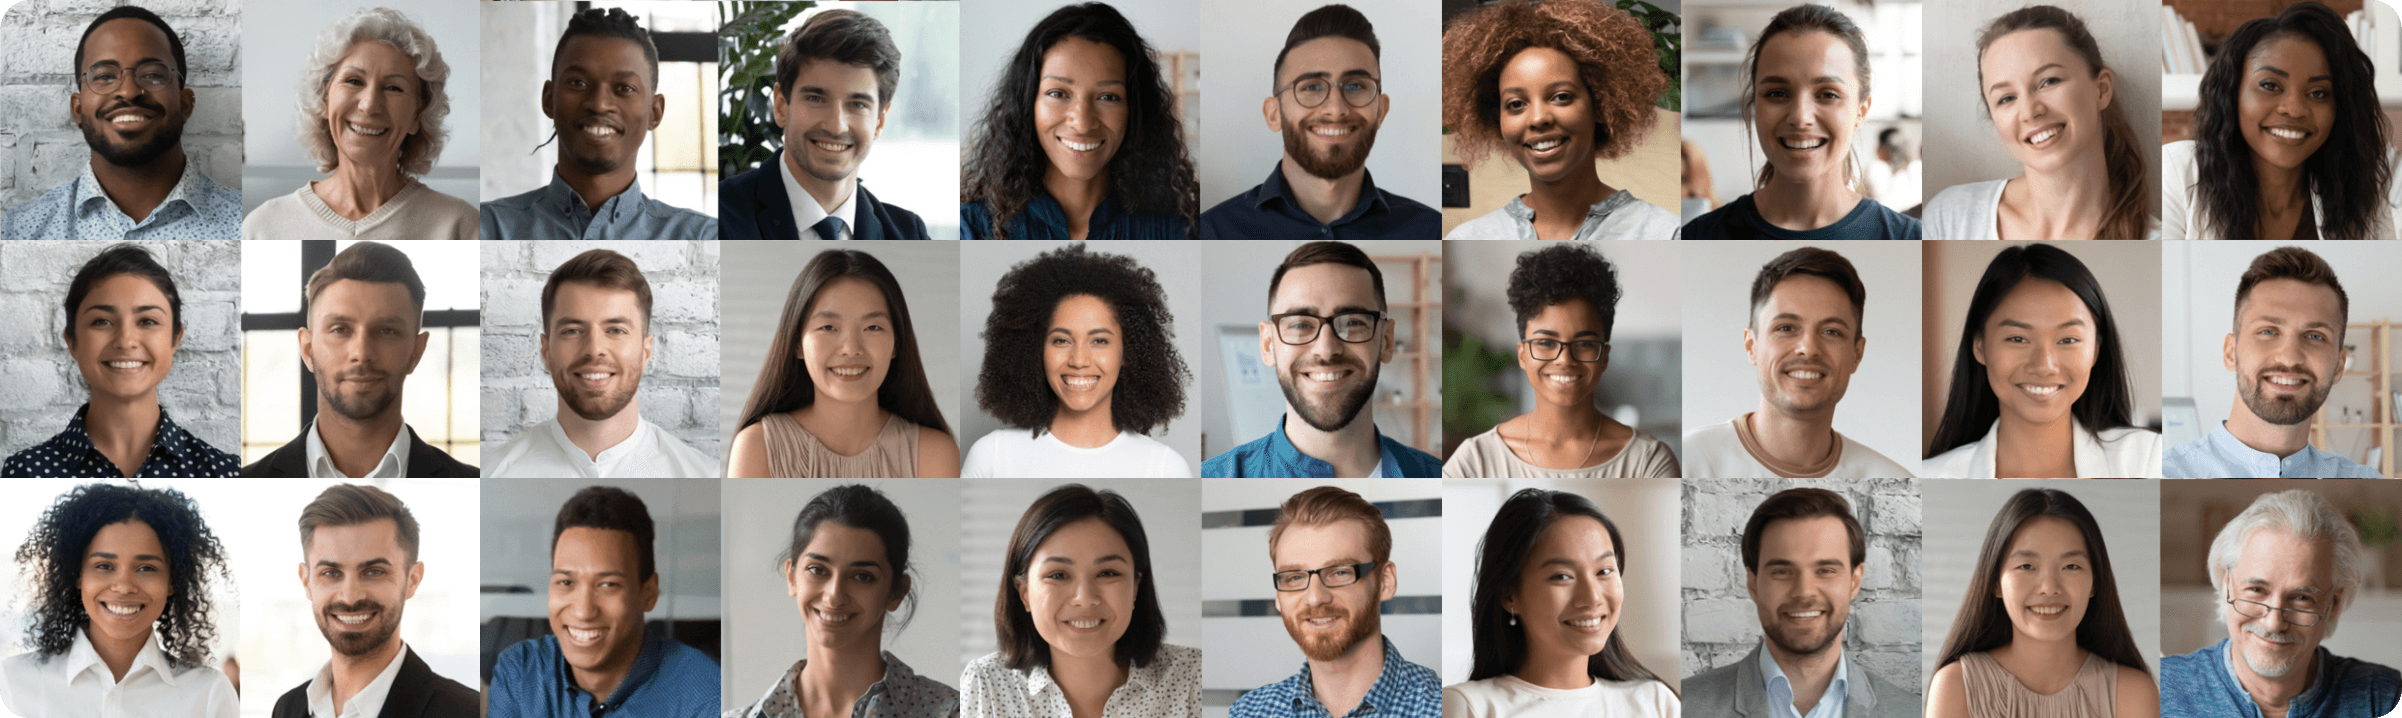 portrait collage of thirty diverse multi-racial people smiling at the camera in a variety of settings.